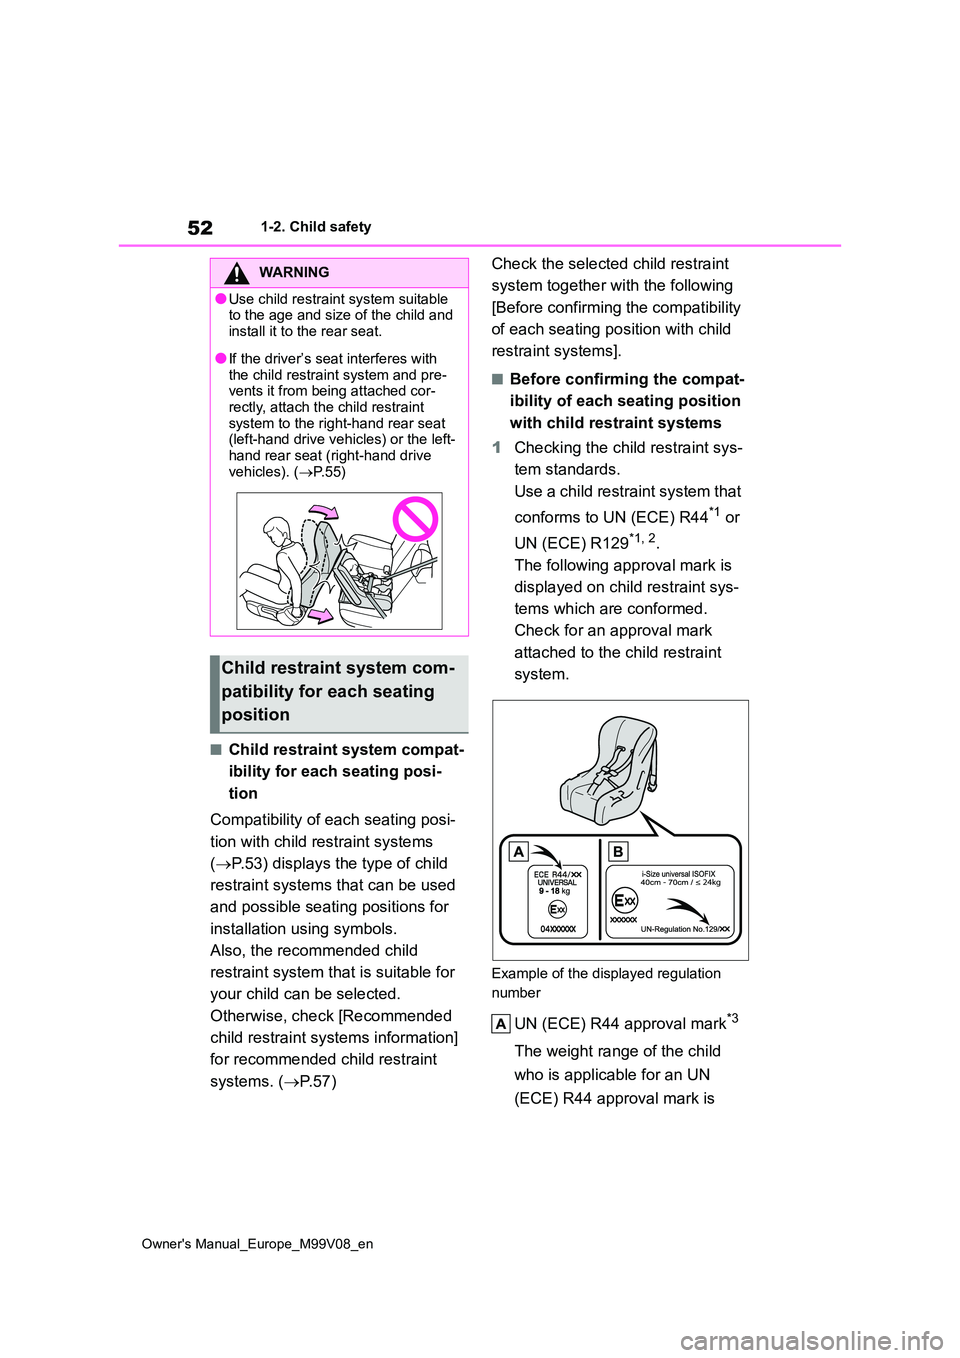 TOYOTA AYGO X 2022  Owners Manual (in English) 52
Owner's Manual_Europe_M99V08_en
1-2. Child safety
■Child restraint system compat- 
ibility for each seating posi- 
tion 
Compatibility of each seating posi- 
tion with child restraint systems